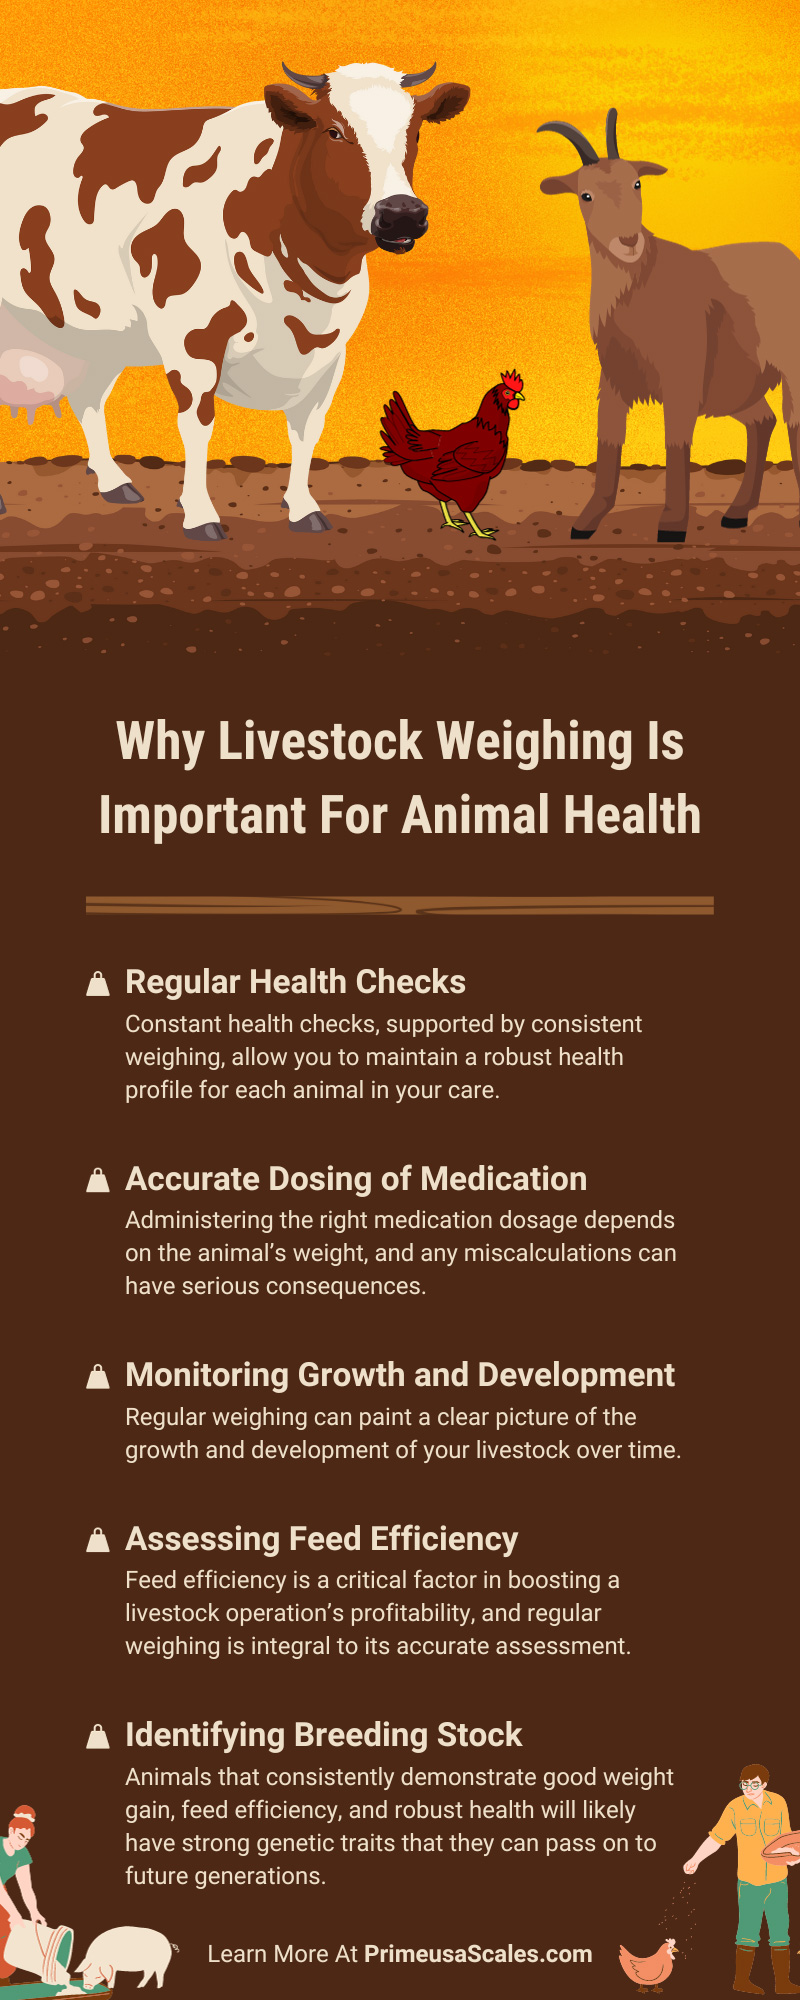 Why Livestock Weighing Is Important for Animal Health